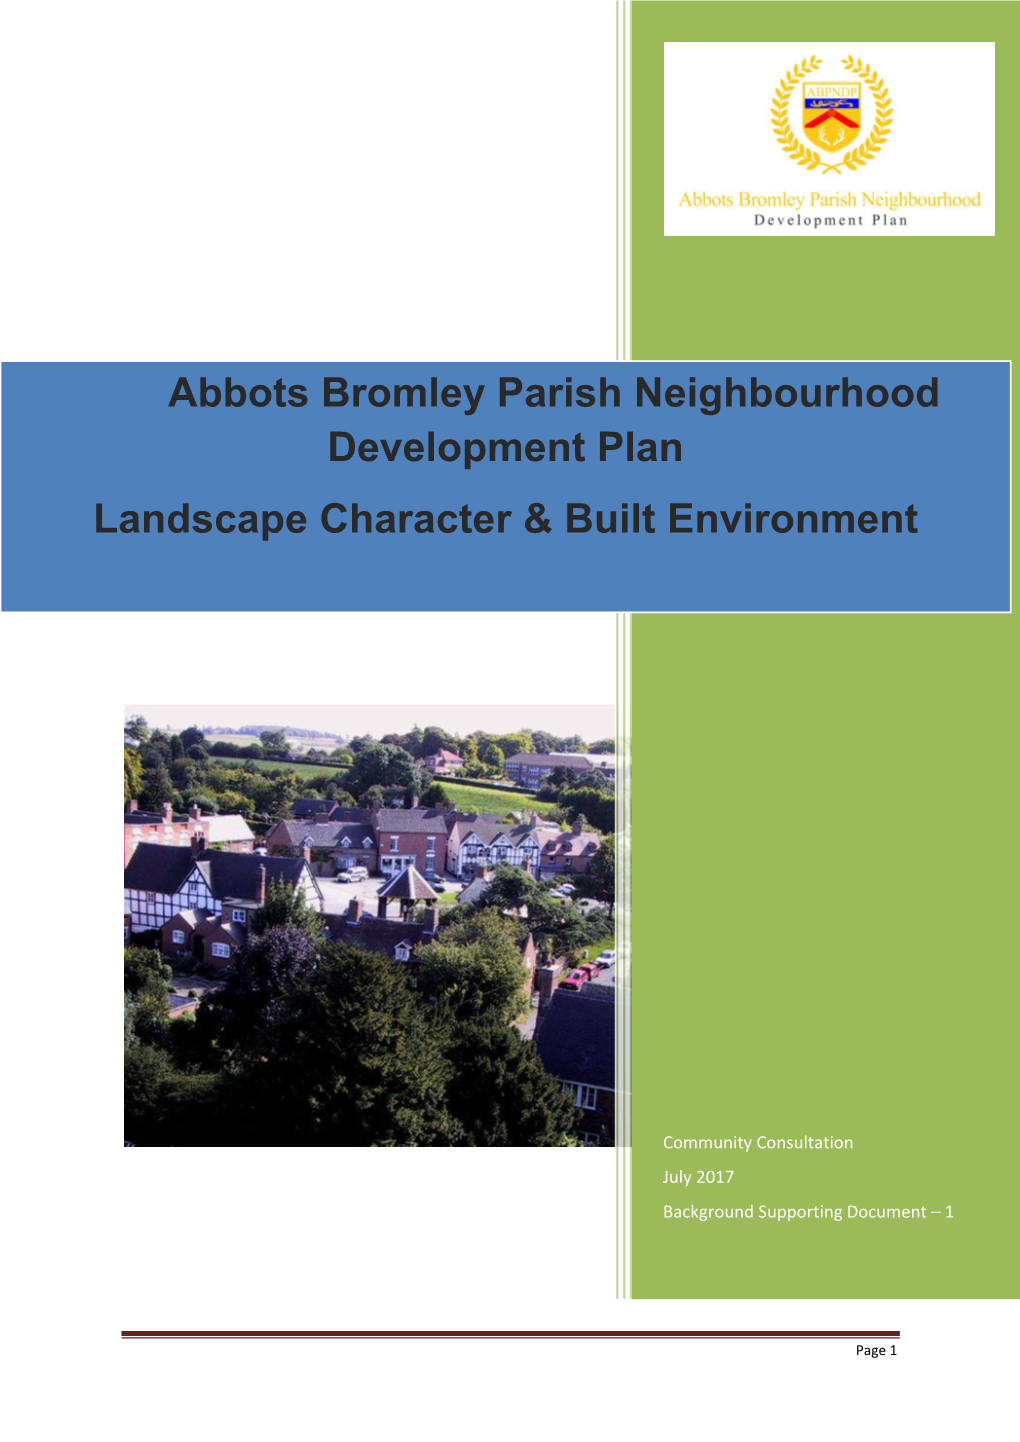 Landscape Character and Built Environment